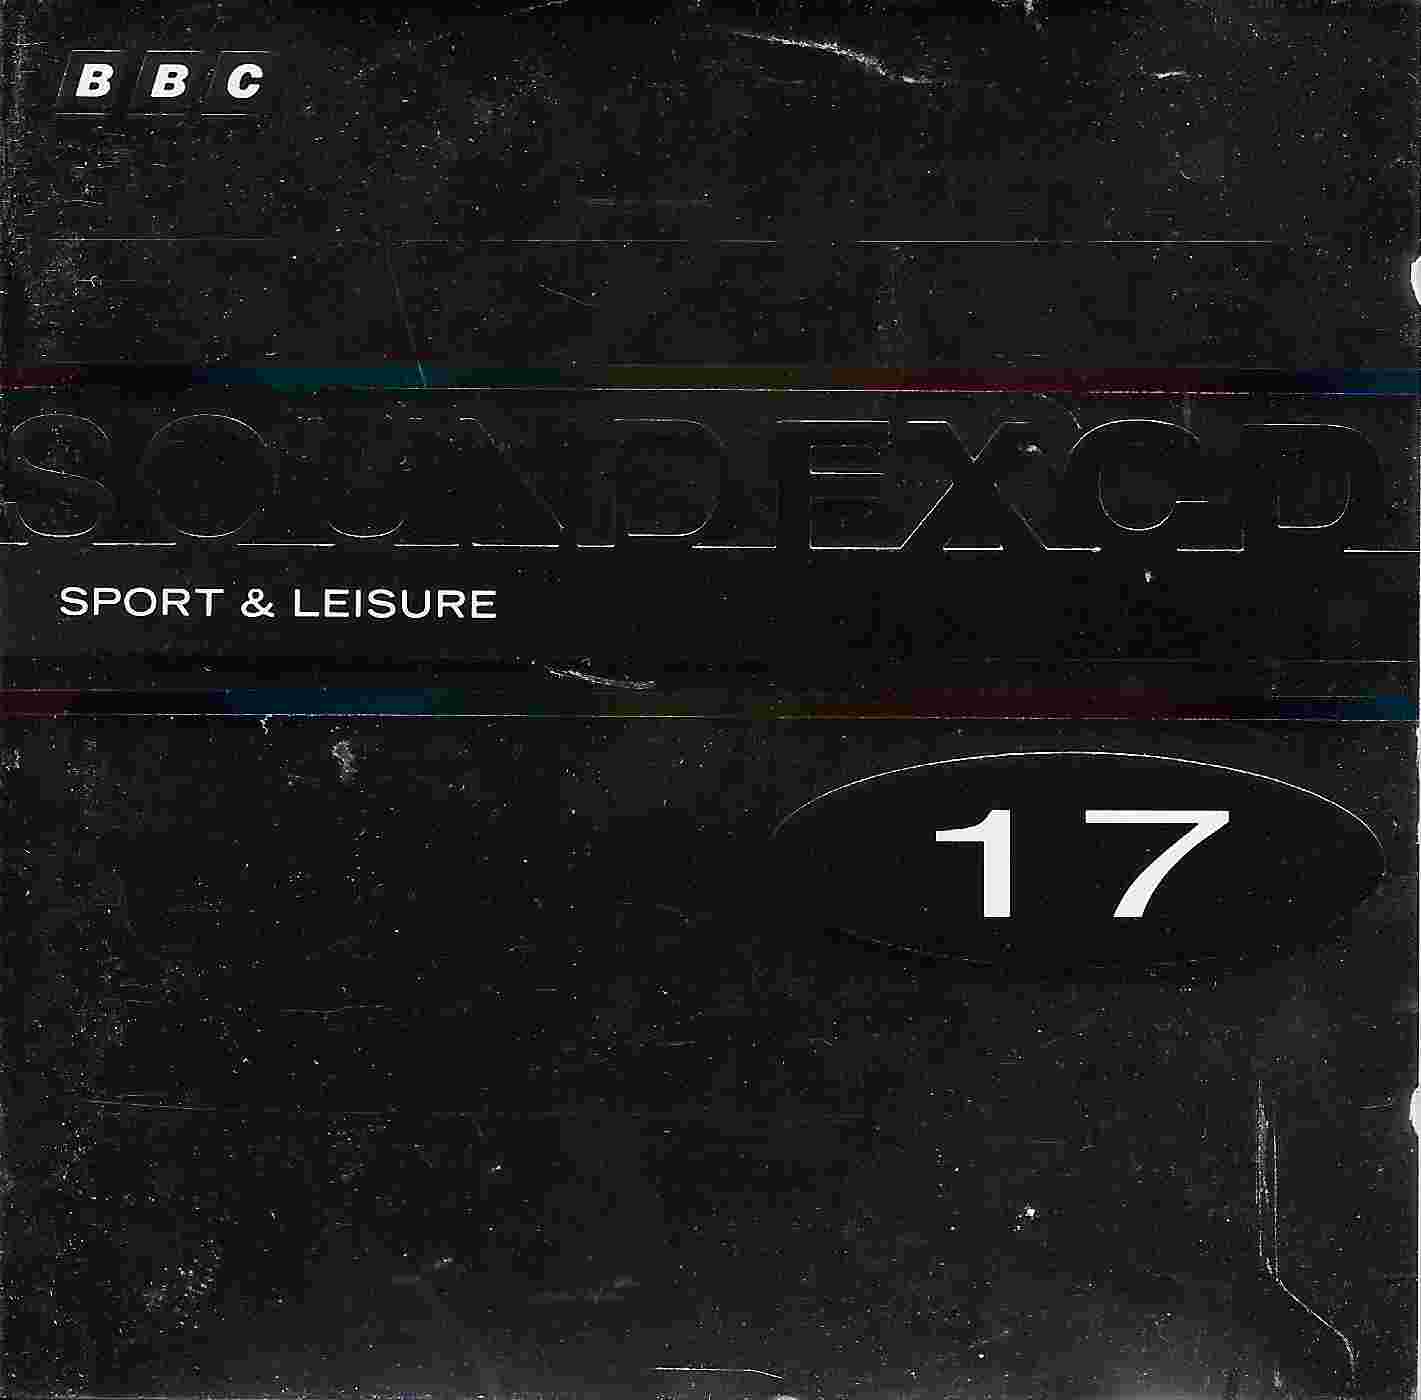 Picture of BBCCD SFX017 Sport and leisure by artist Various from the BBC cds - Records and Tapes library